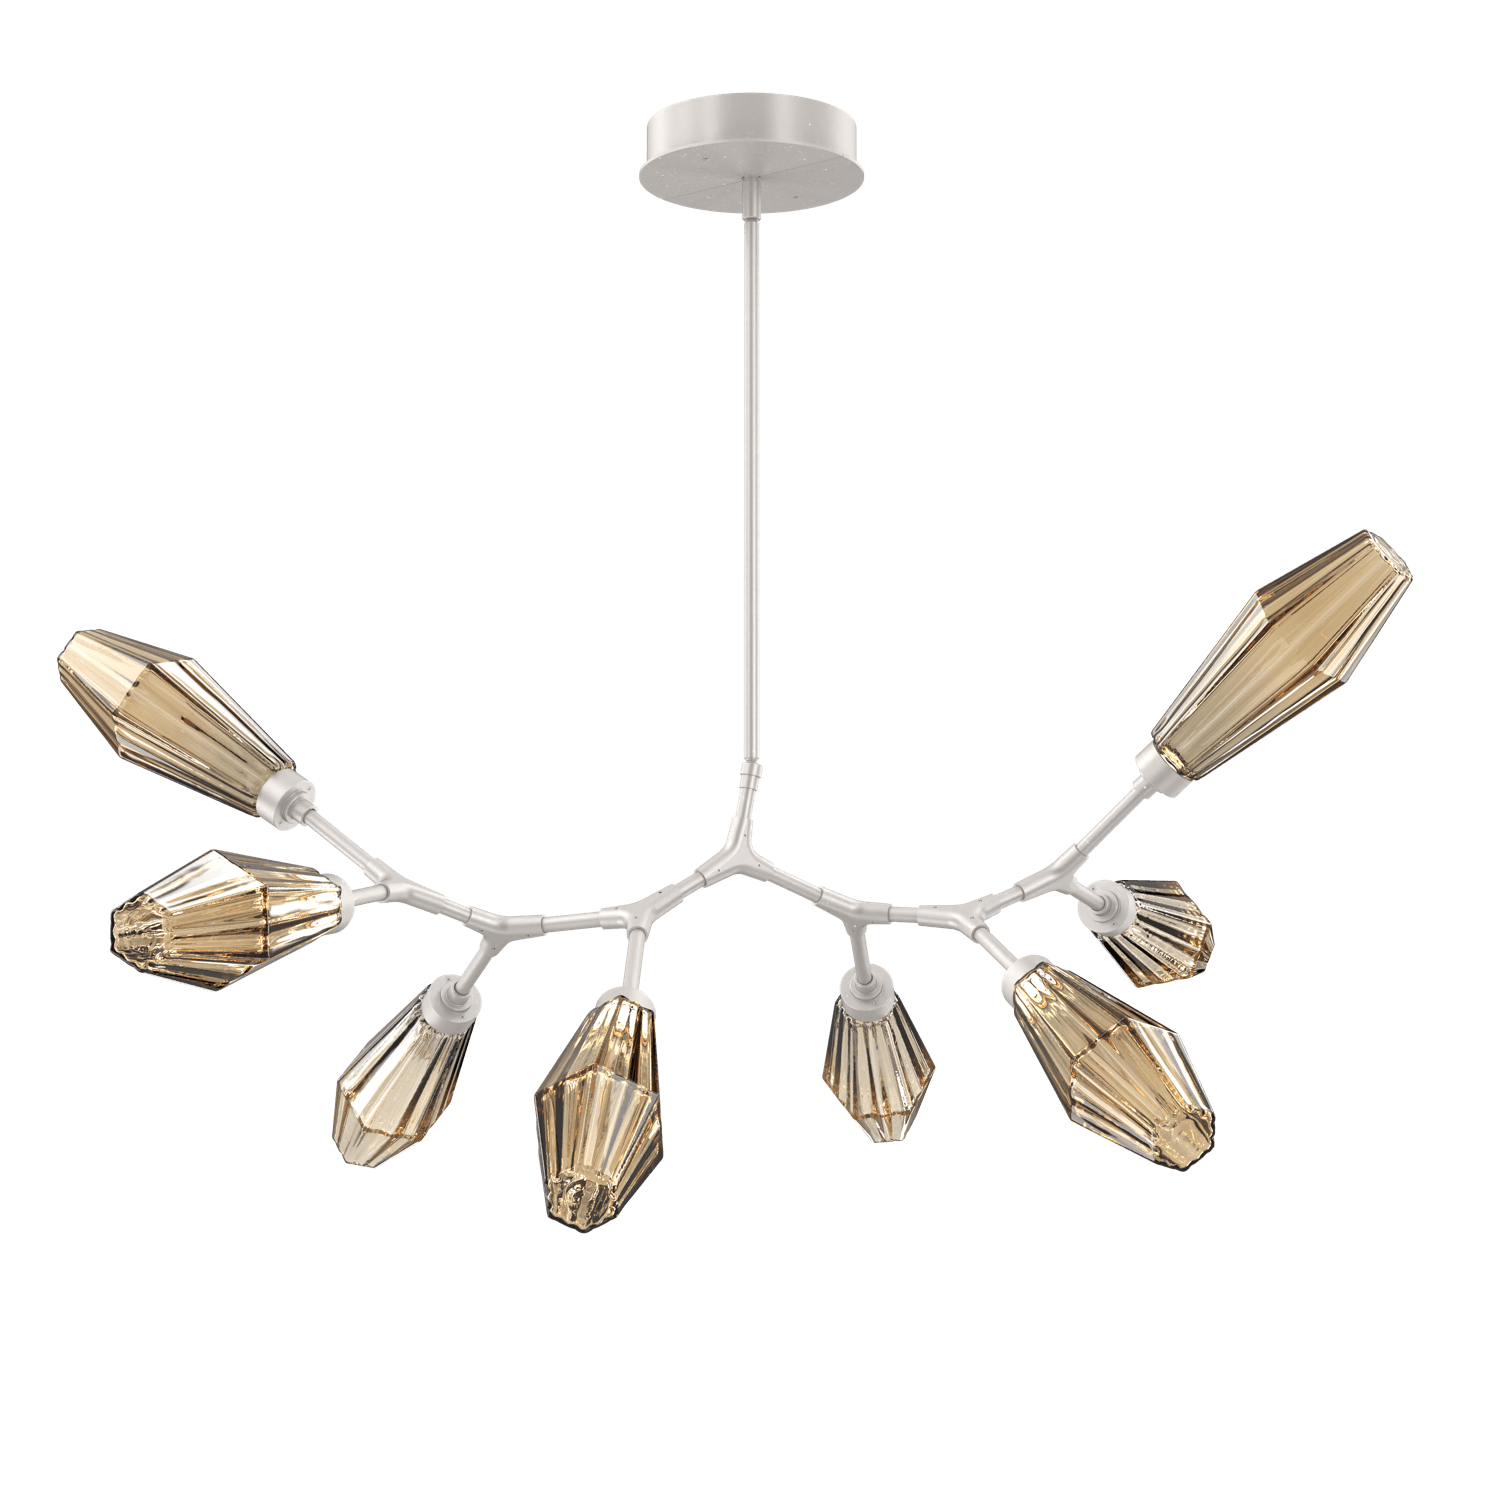 PLB0049-BB-BS-RB-Hammerton-Studio-Aalto-8-light-modern-branch-chandelier-with-metallic-beige-silver-finish-and-optic-ribbed-bronze-glass-shades-and-LED-lamping